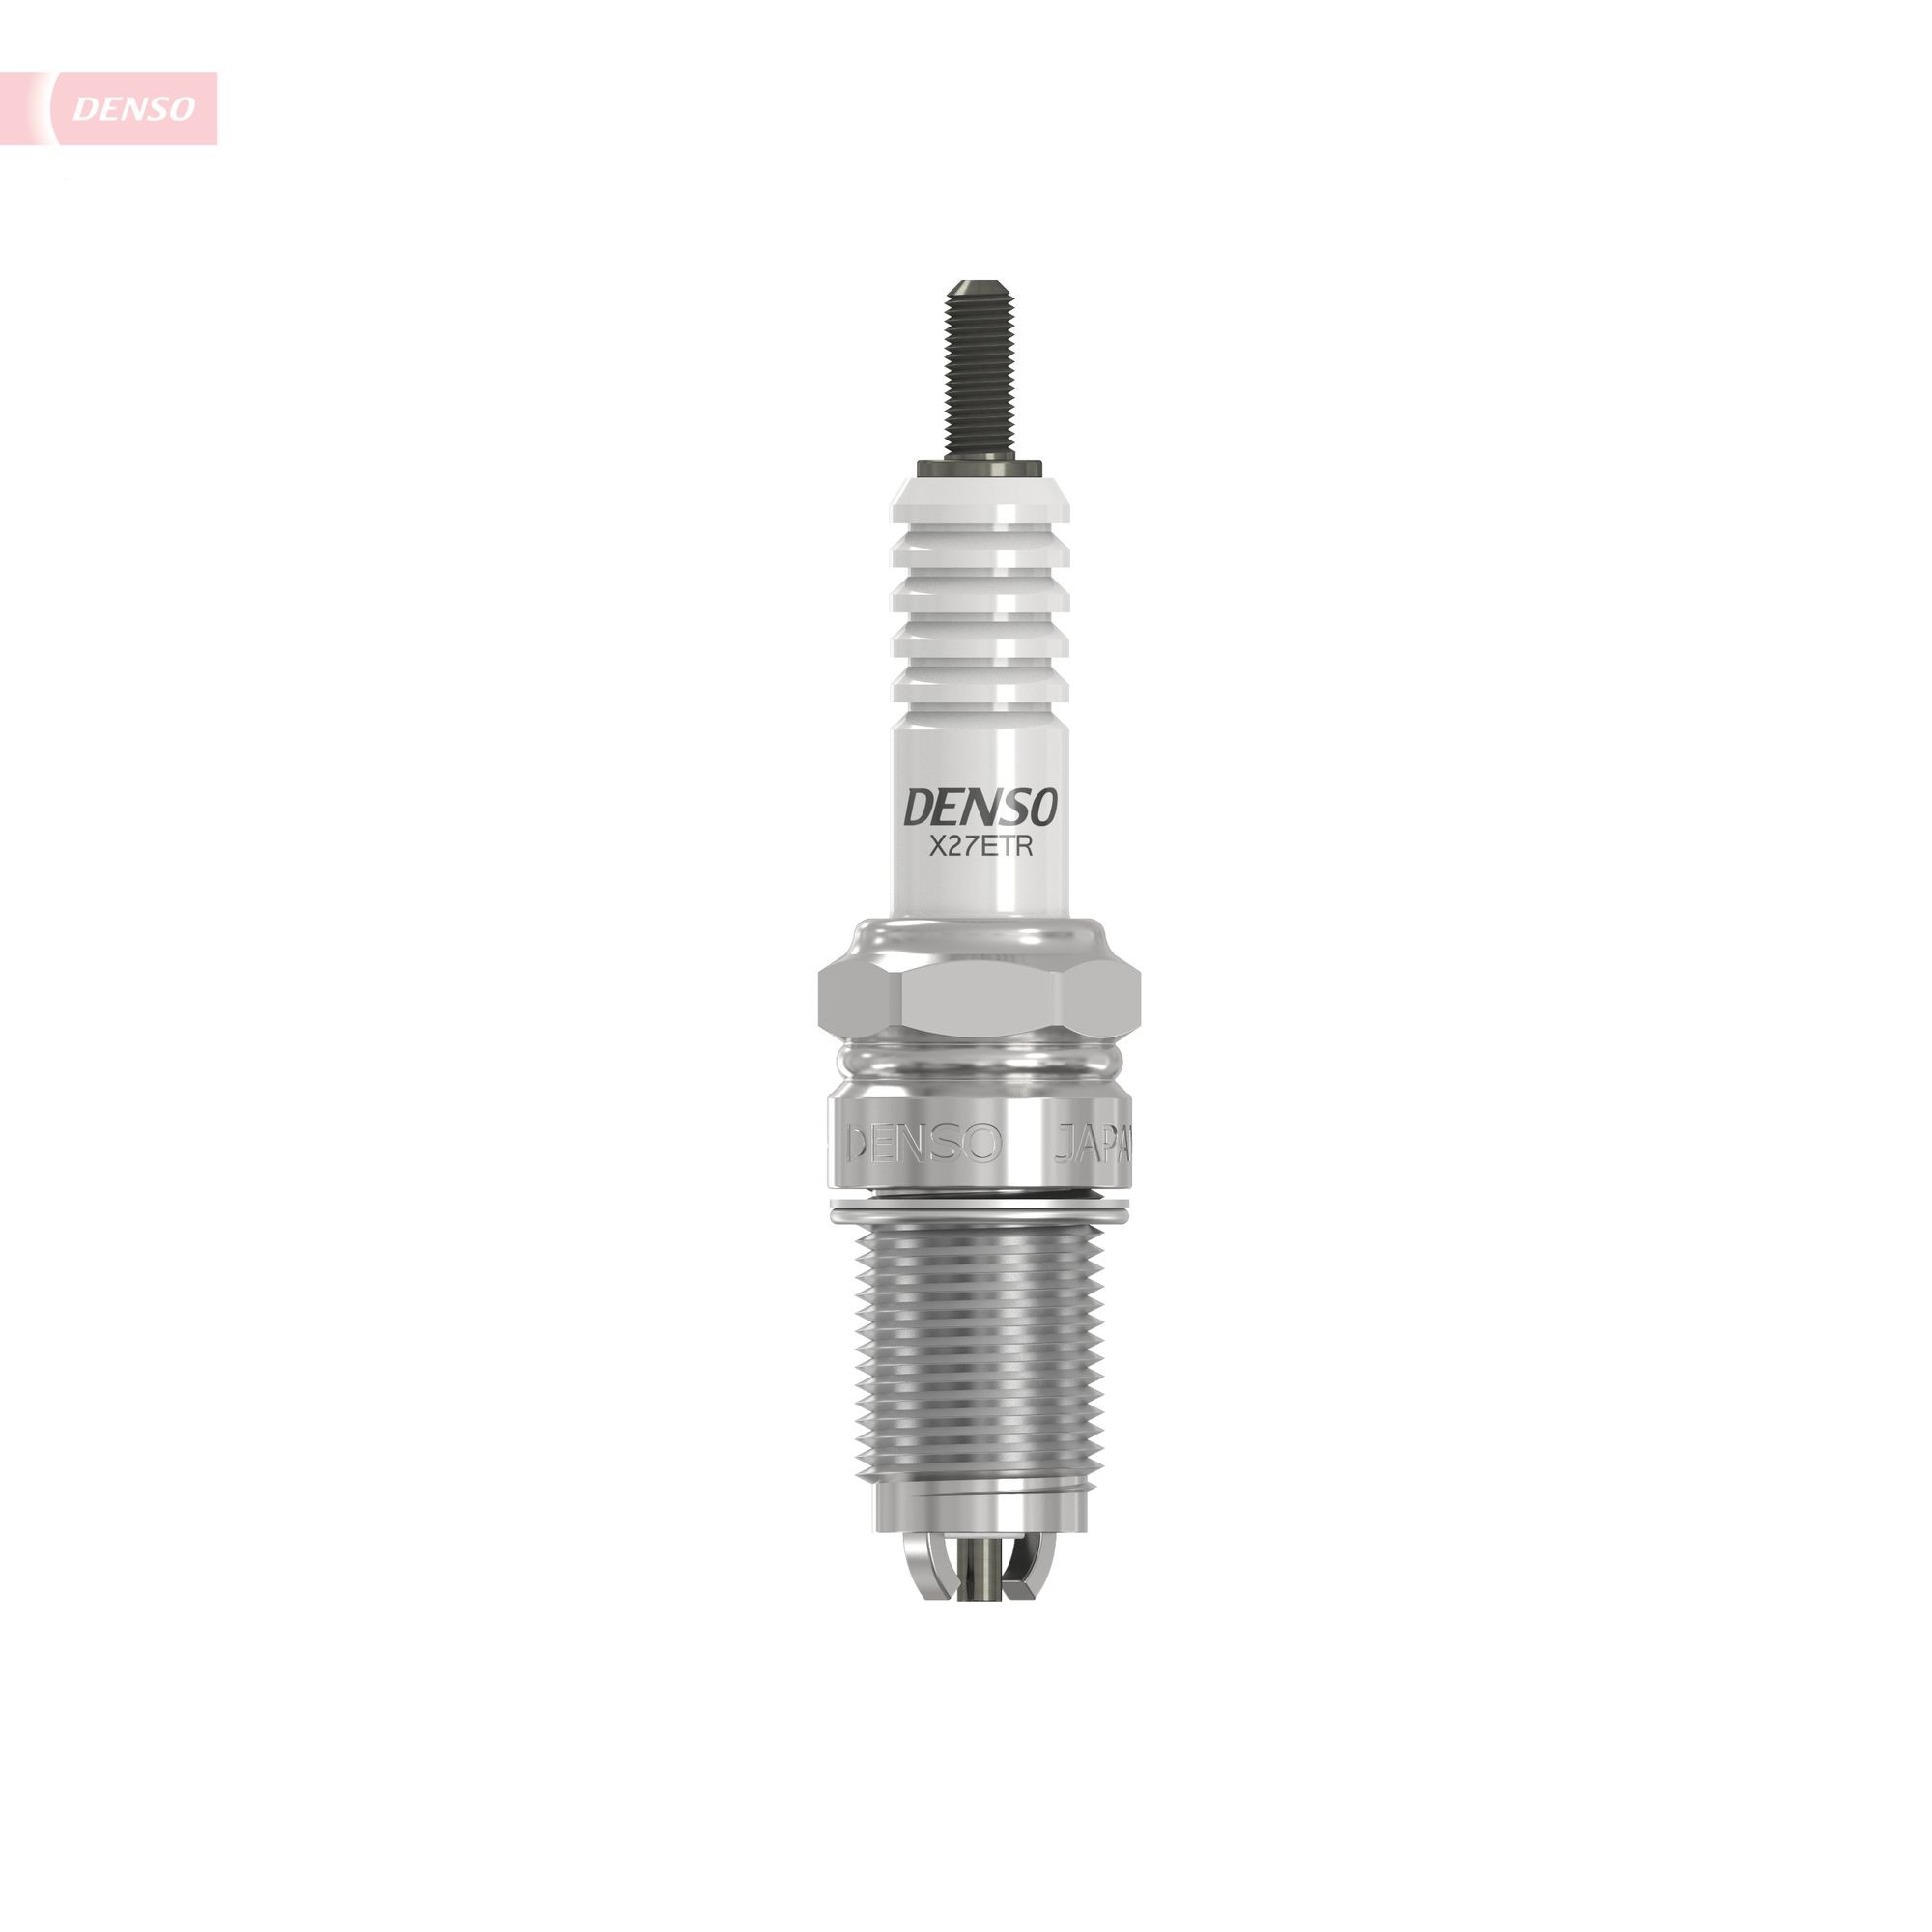 DENSO Spark plugs 4130 buy online